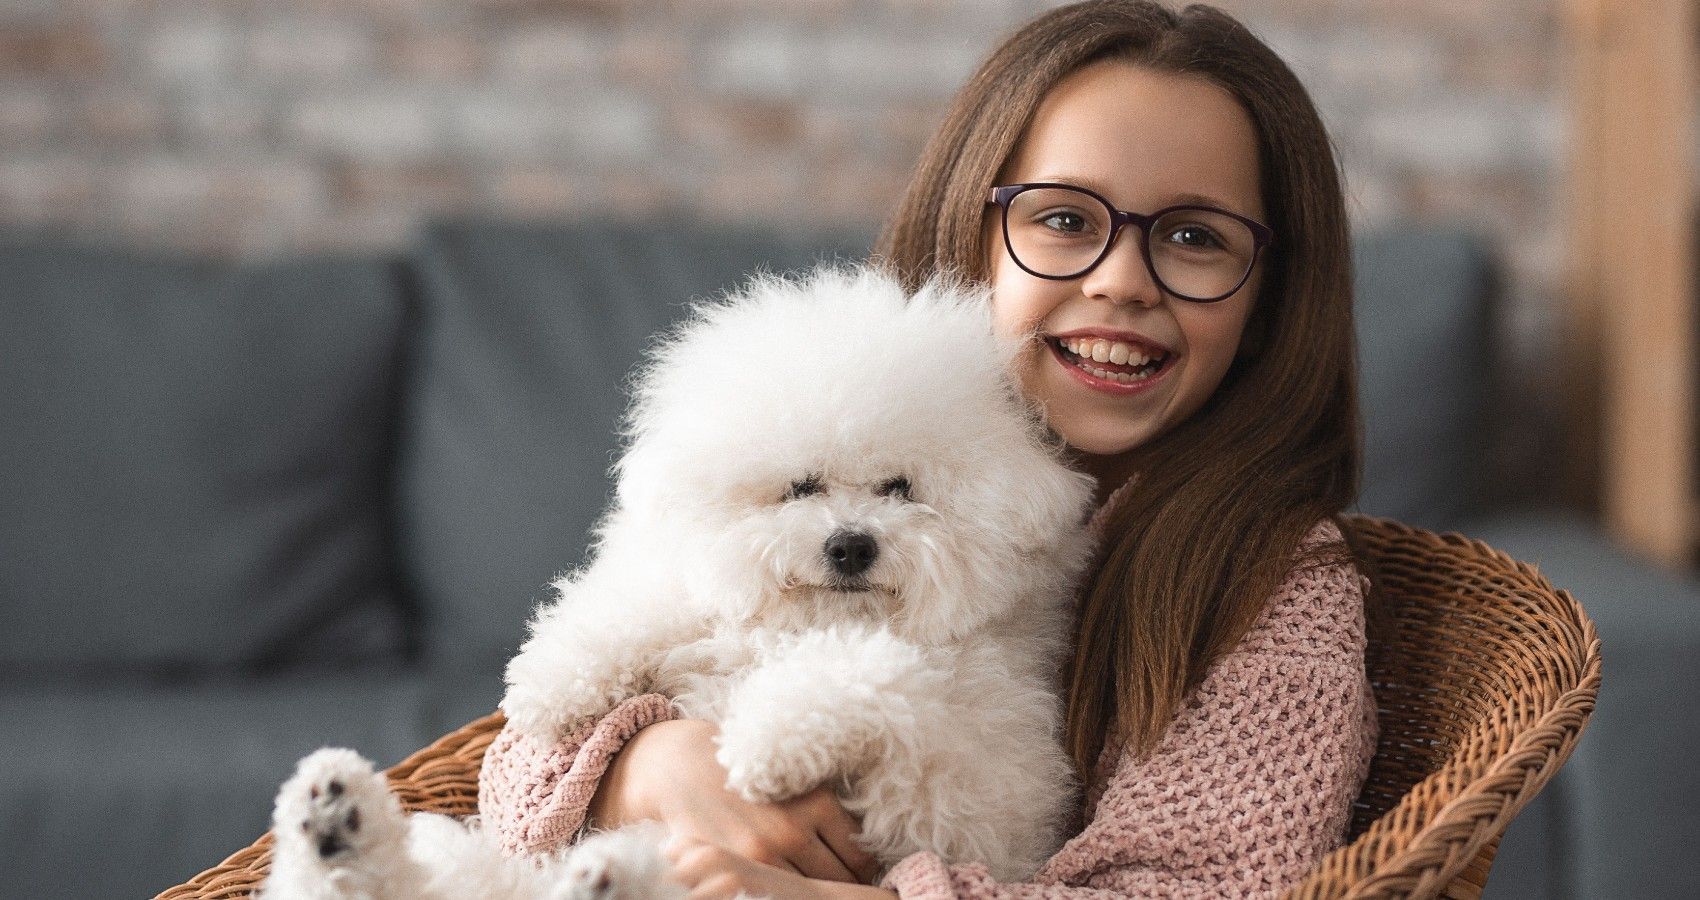 A Child Holding A Small Dog